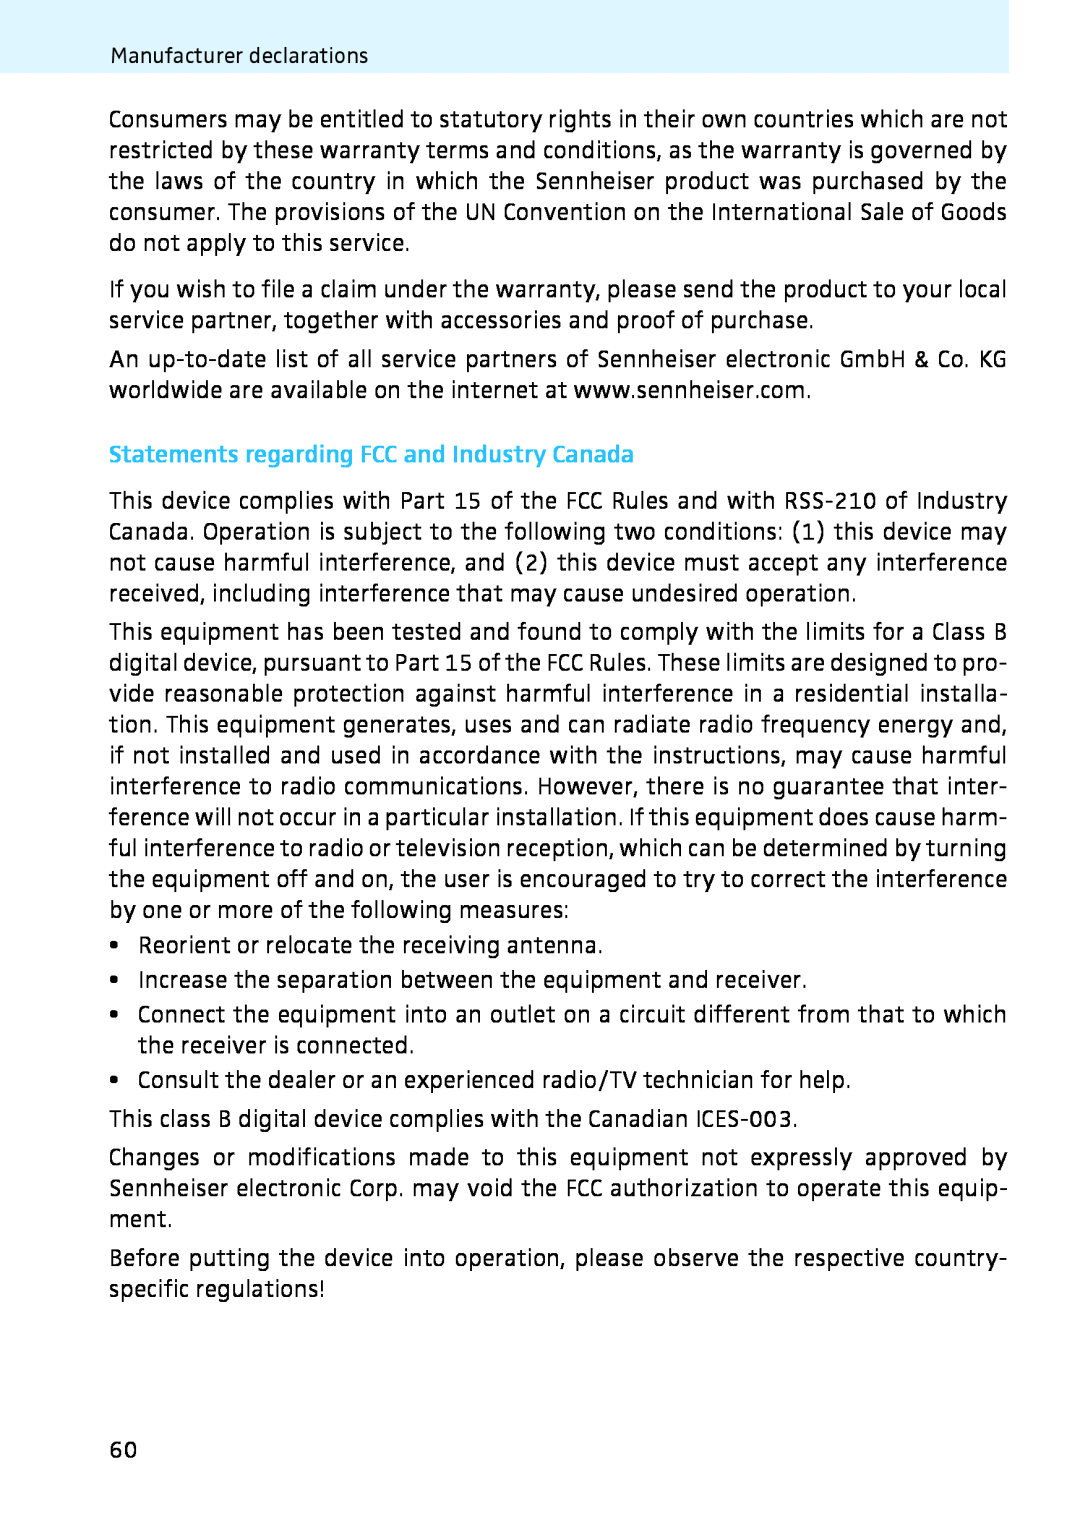 Sennheiser 2020 instruction manual Statements regarding FCC and Industry Canada, Reorient or relocate the receiving antenna 